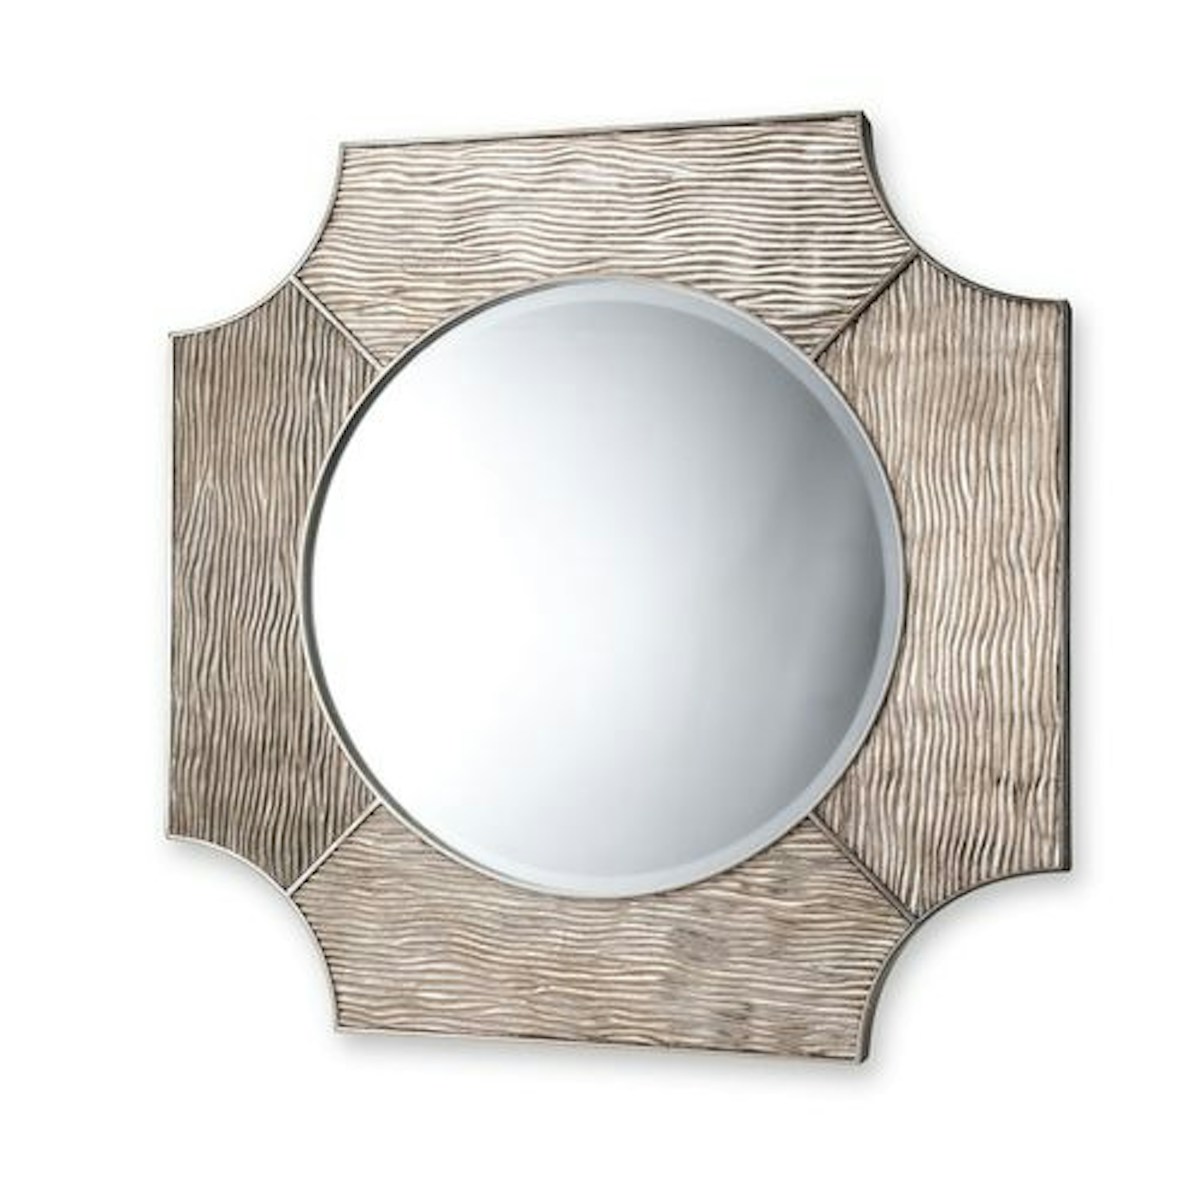 Antique Silver Lucas Mirror - 9 Best Statement Wall Mirrors To Hang In Your Home - LuxDeco.com